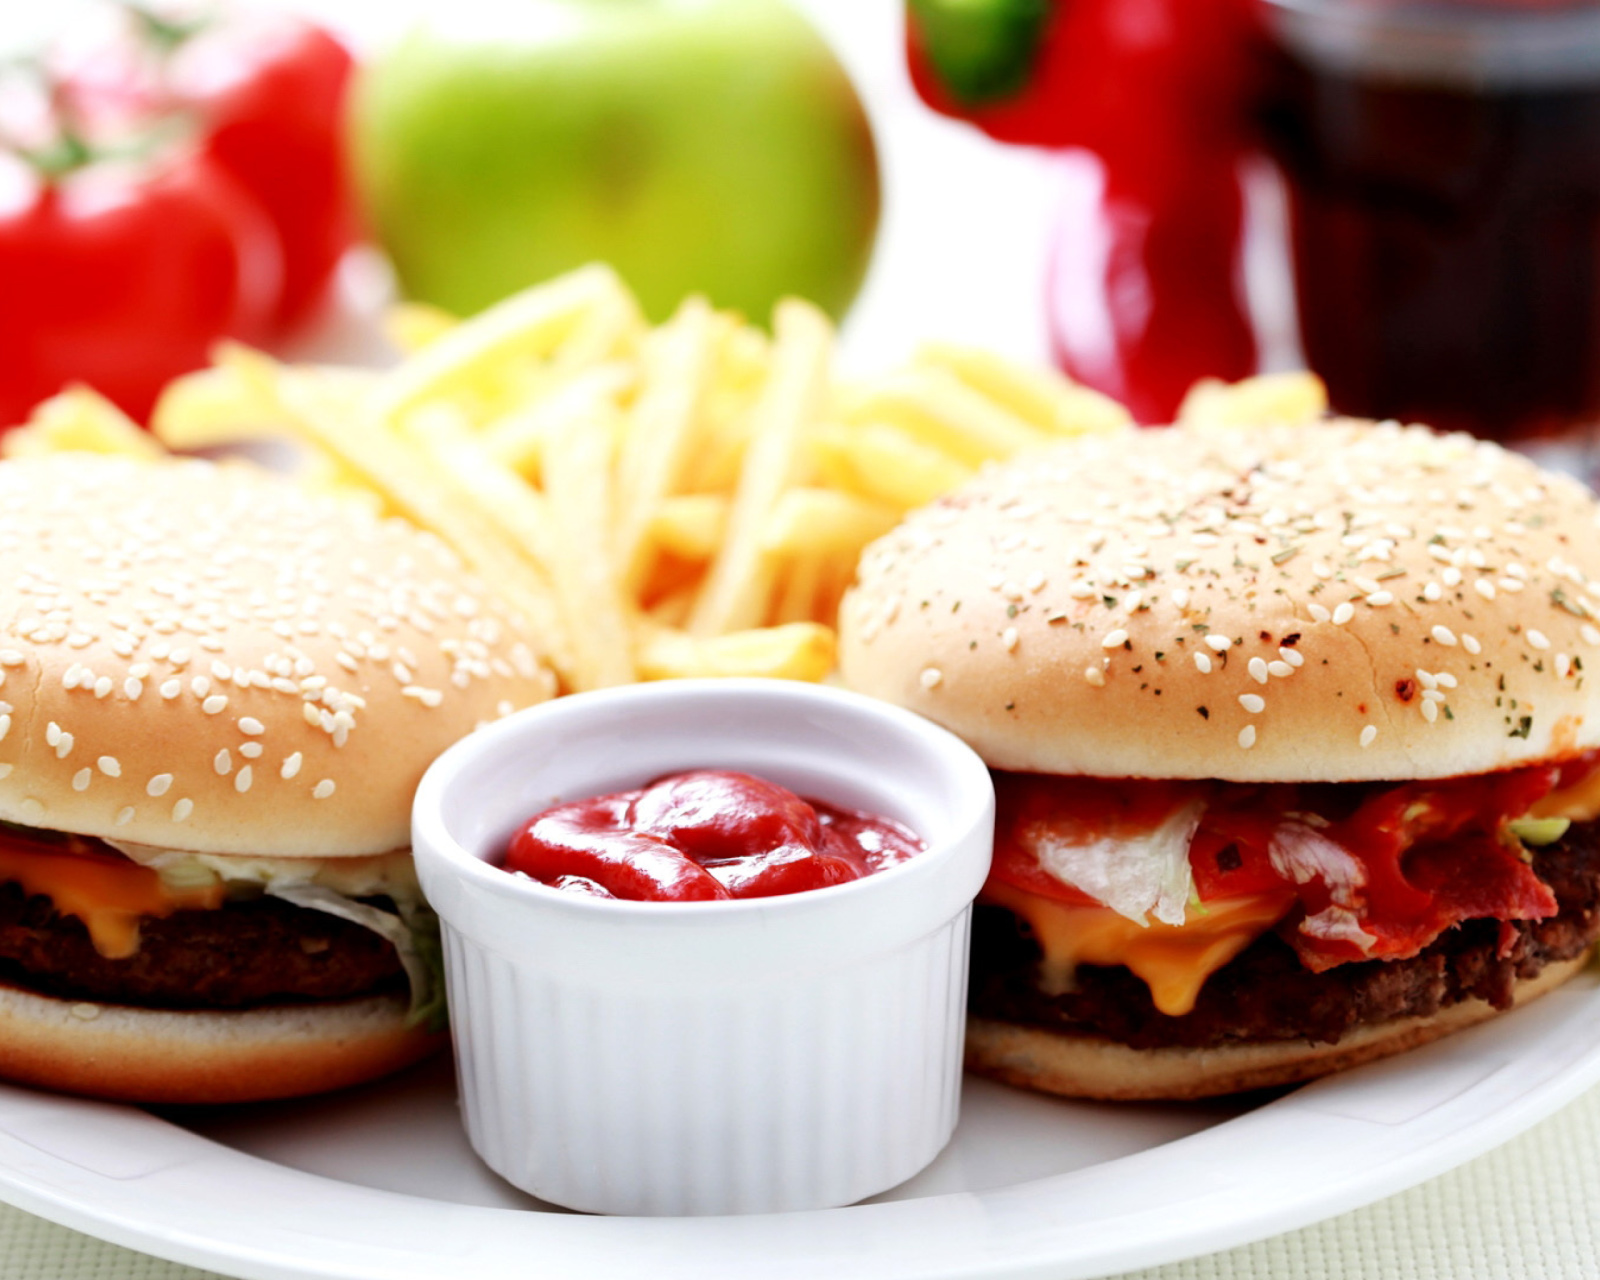 Burgers with Barbecue sauce wallpaper 1600x1280